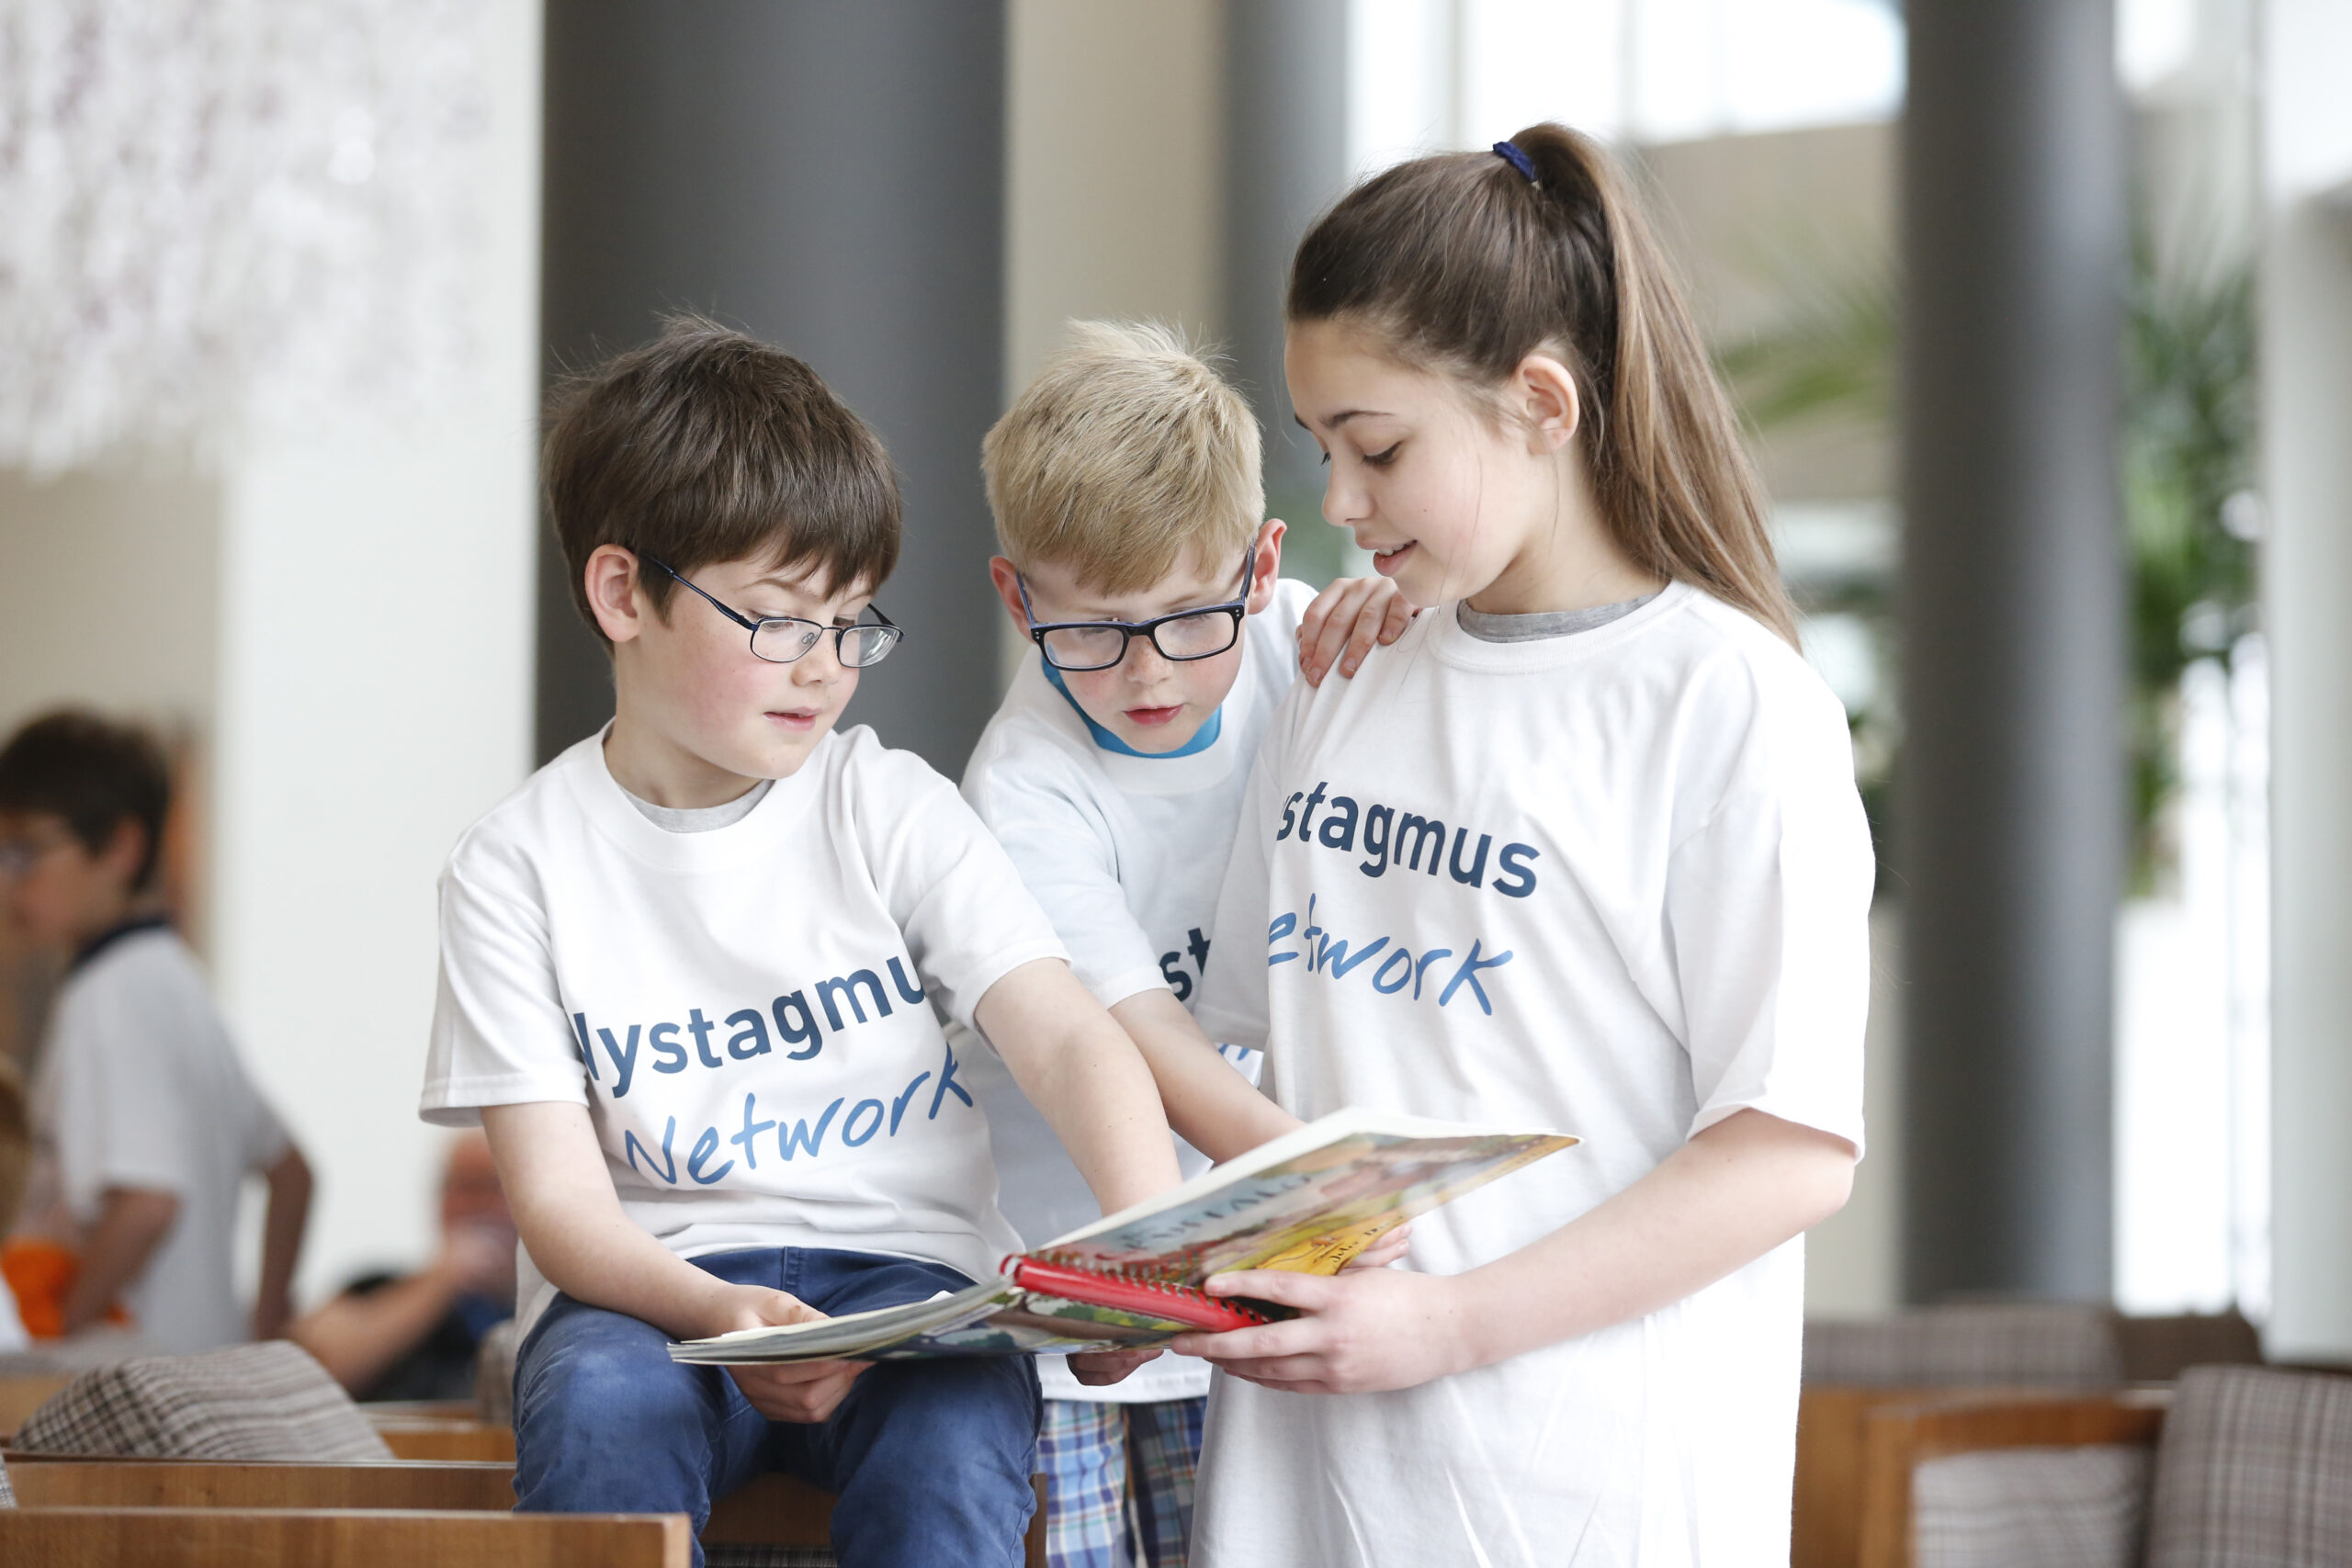 3 children reading a book together. They are all wearing Nystagmus Network T-shirts.